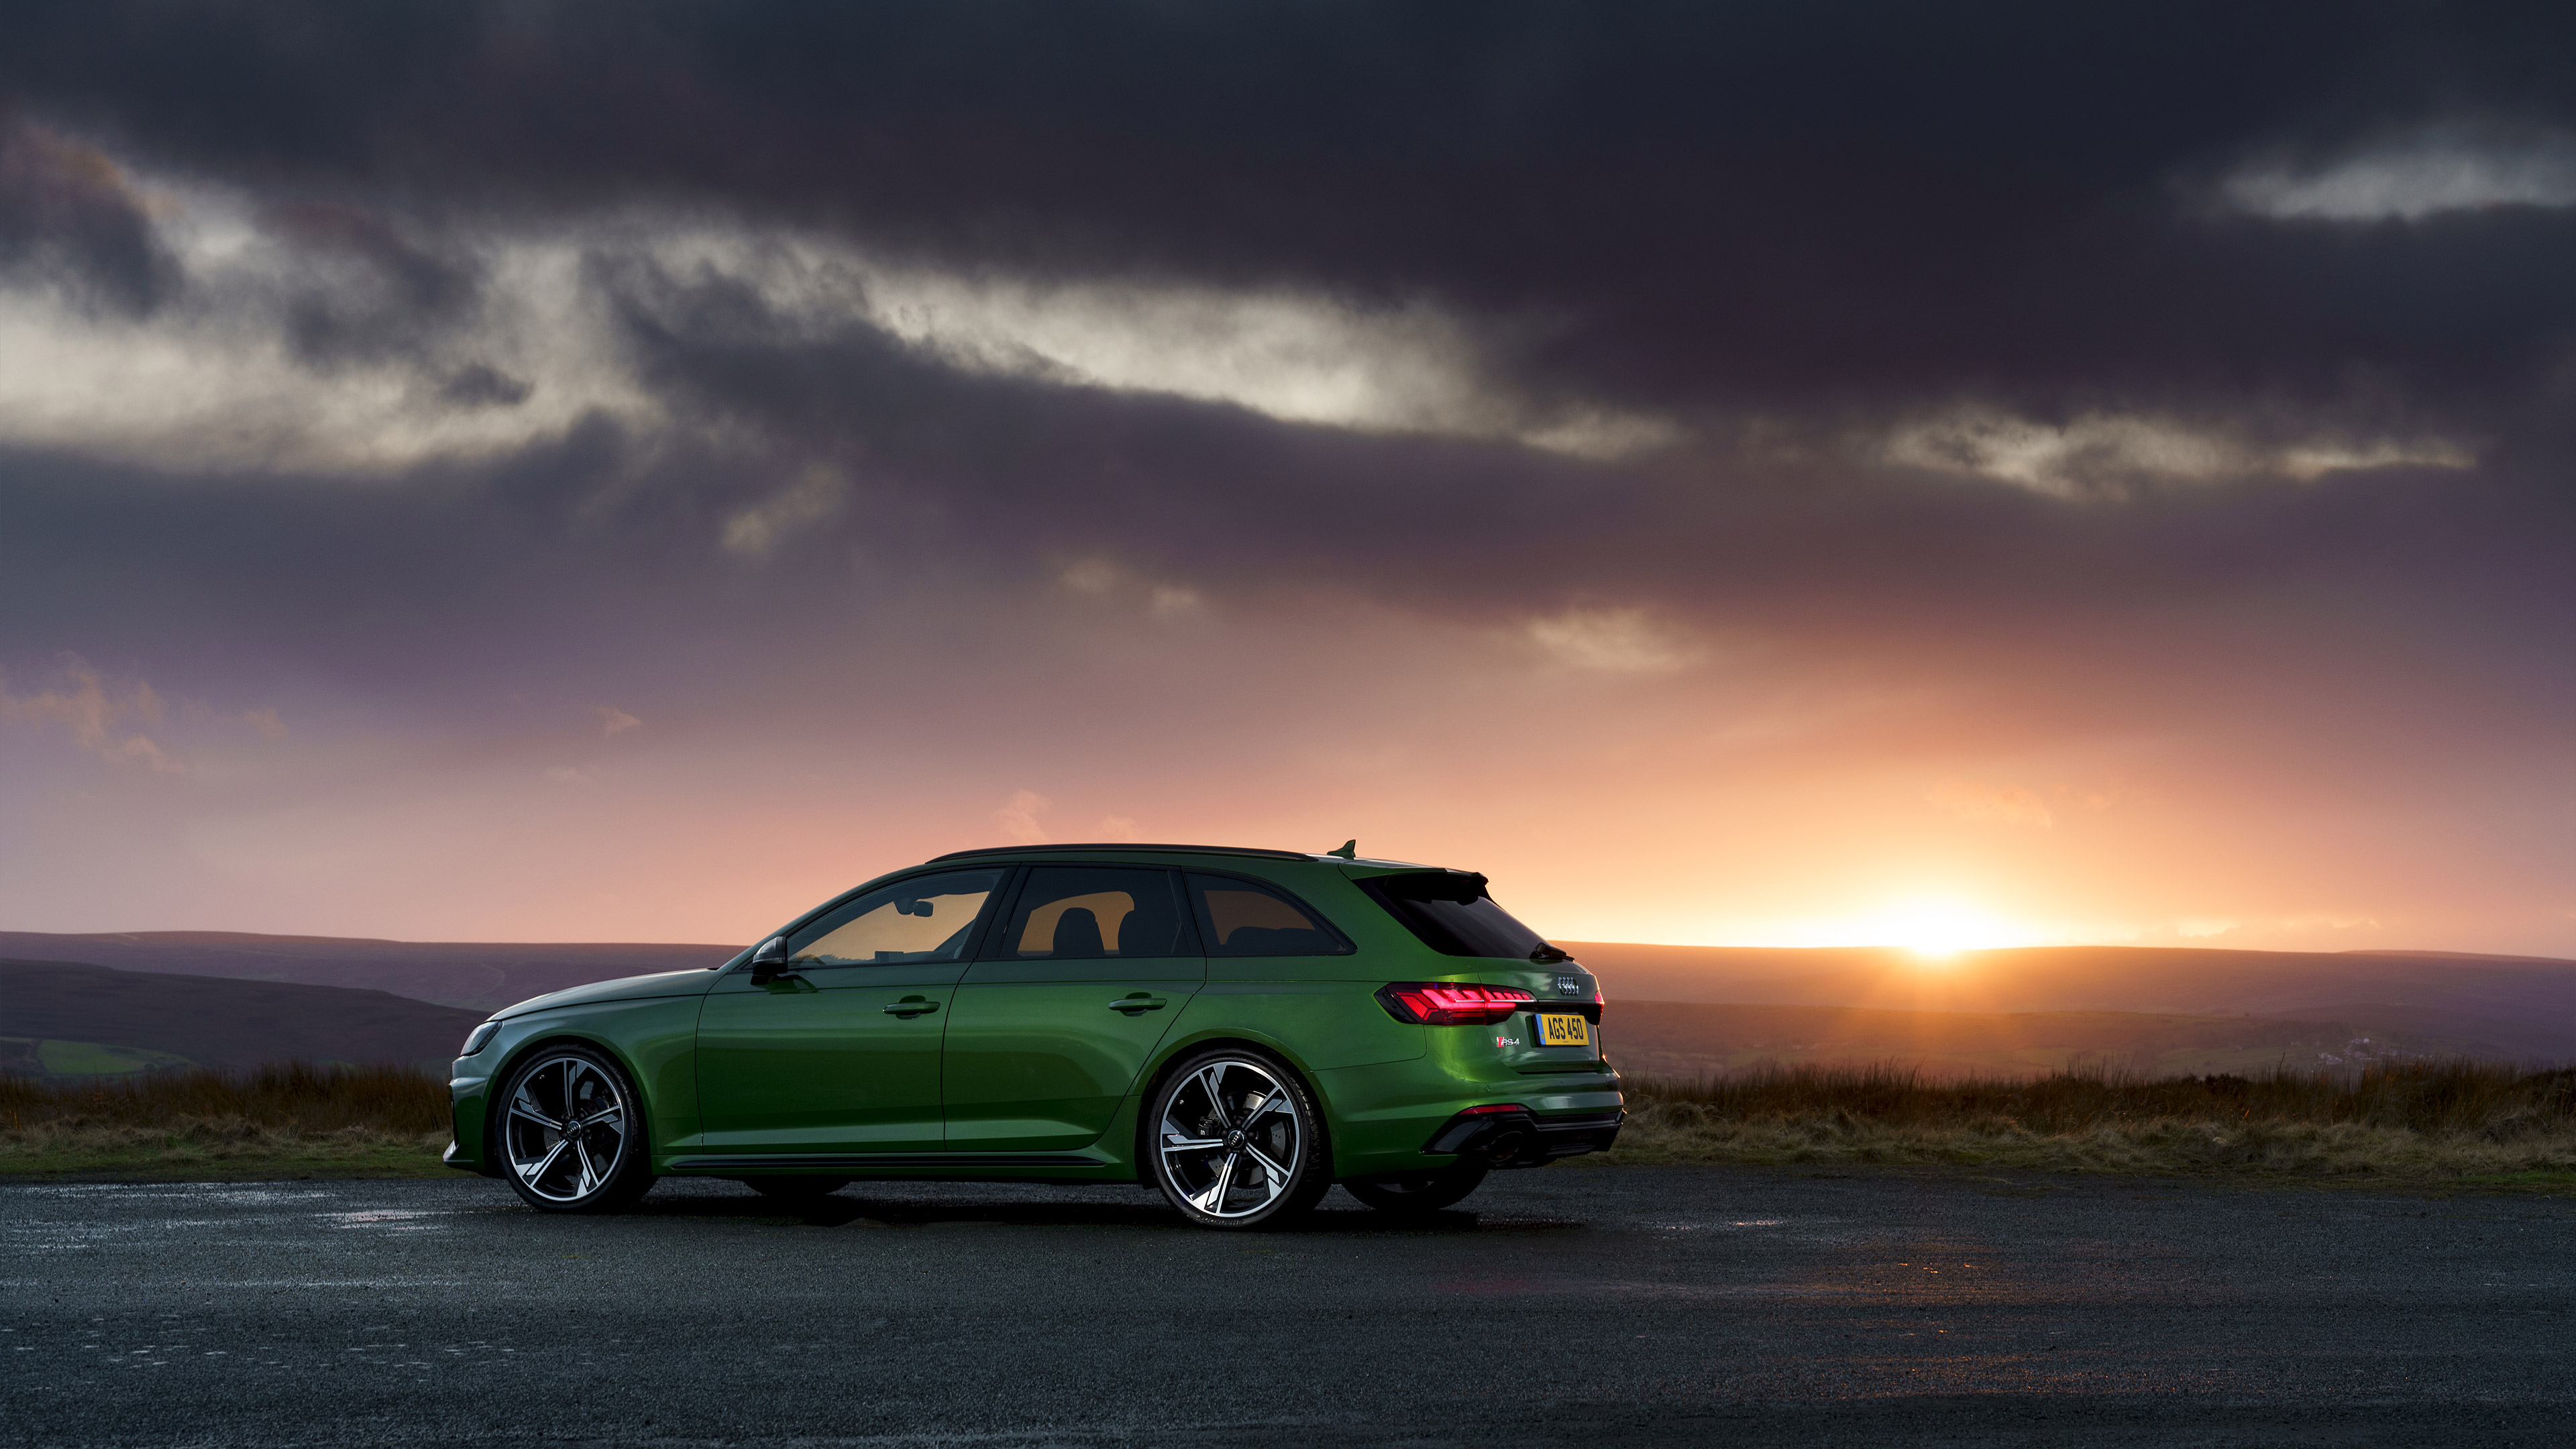 General 3840x2160 Audi RS4 Avant Audi RS4 car vehicle sunset sky green cars numbers station wagon German cars Volkswagen Group